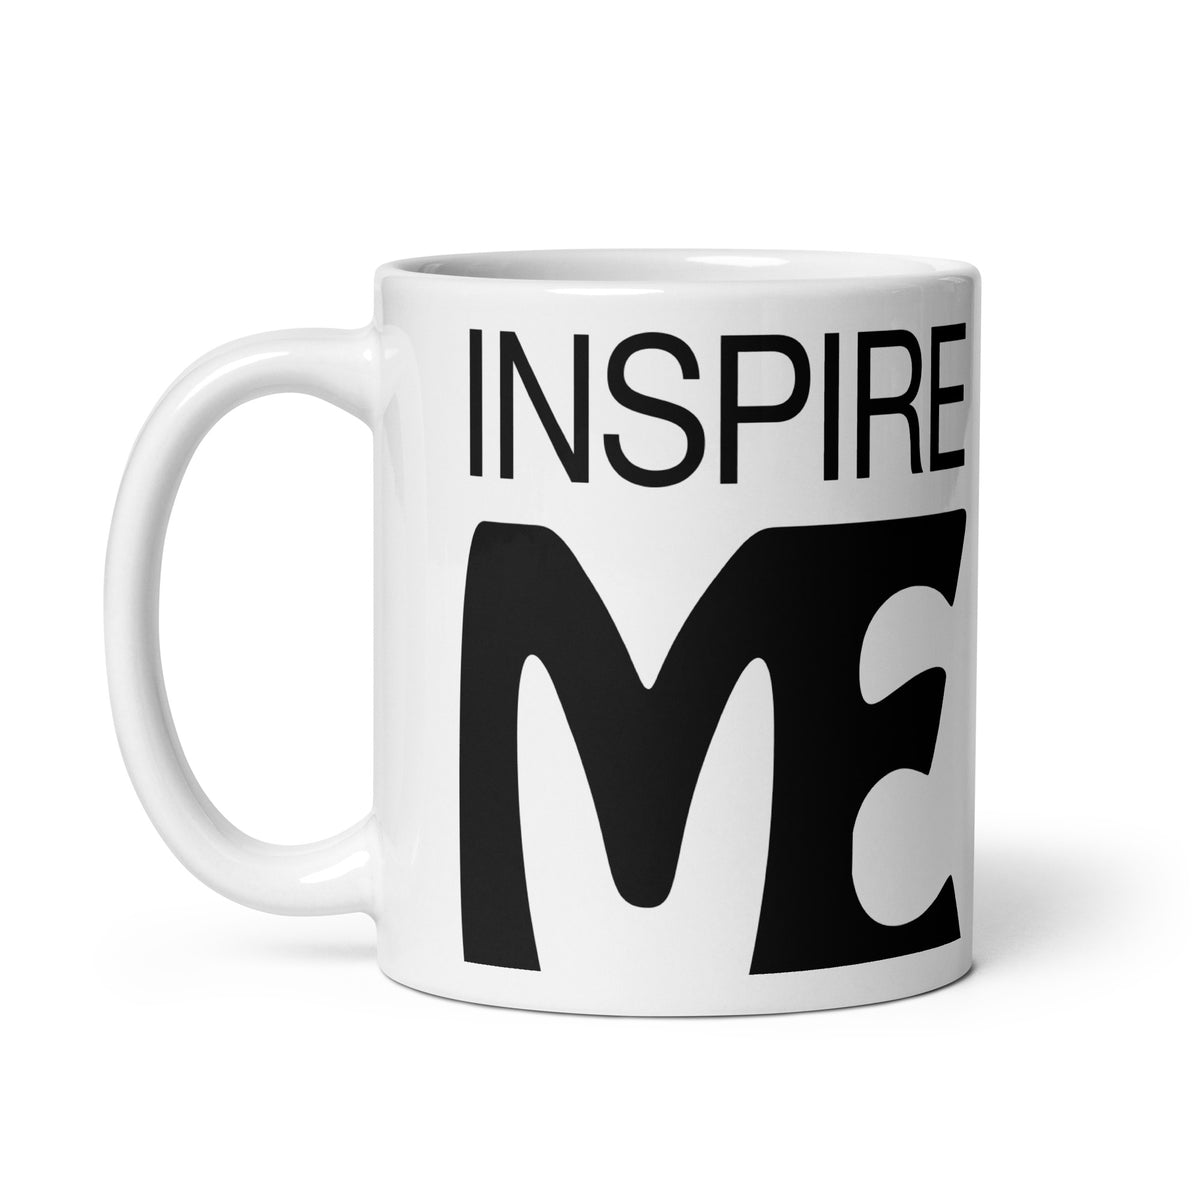 view of a black and white mug that says "inspire me"